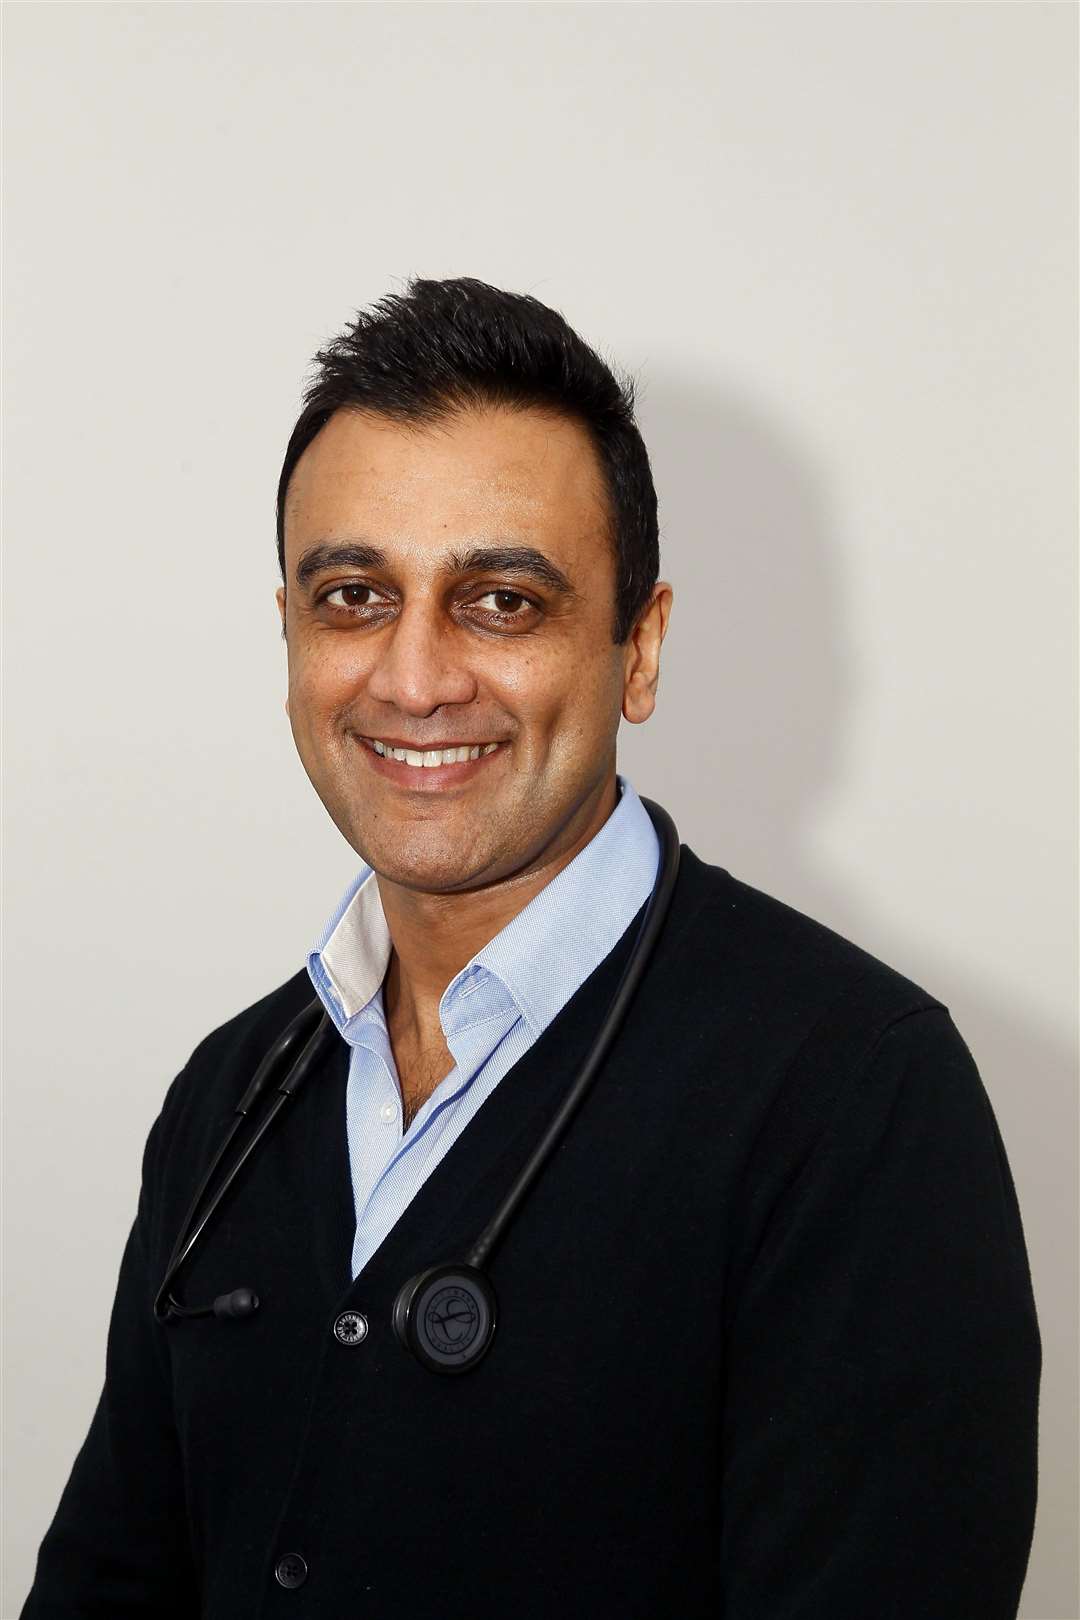 Vitality Home Health, Gravesend. pictures of Dr. Manpinder Sahota and staff members at the Health Centre.Dr. Manpinder Sahota.Picture: Sean Aidan*** have left these as shot (not cropped) can be used upright or square** (6820851)